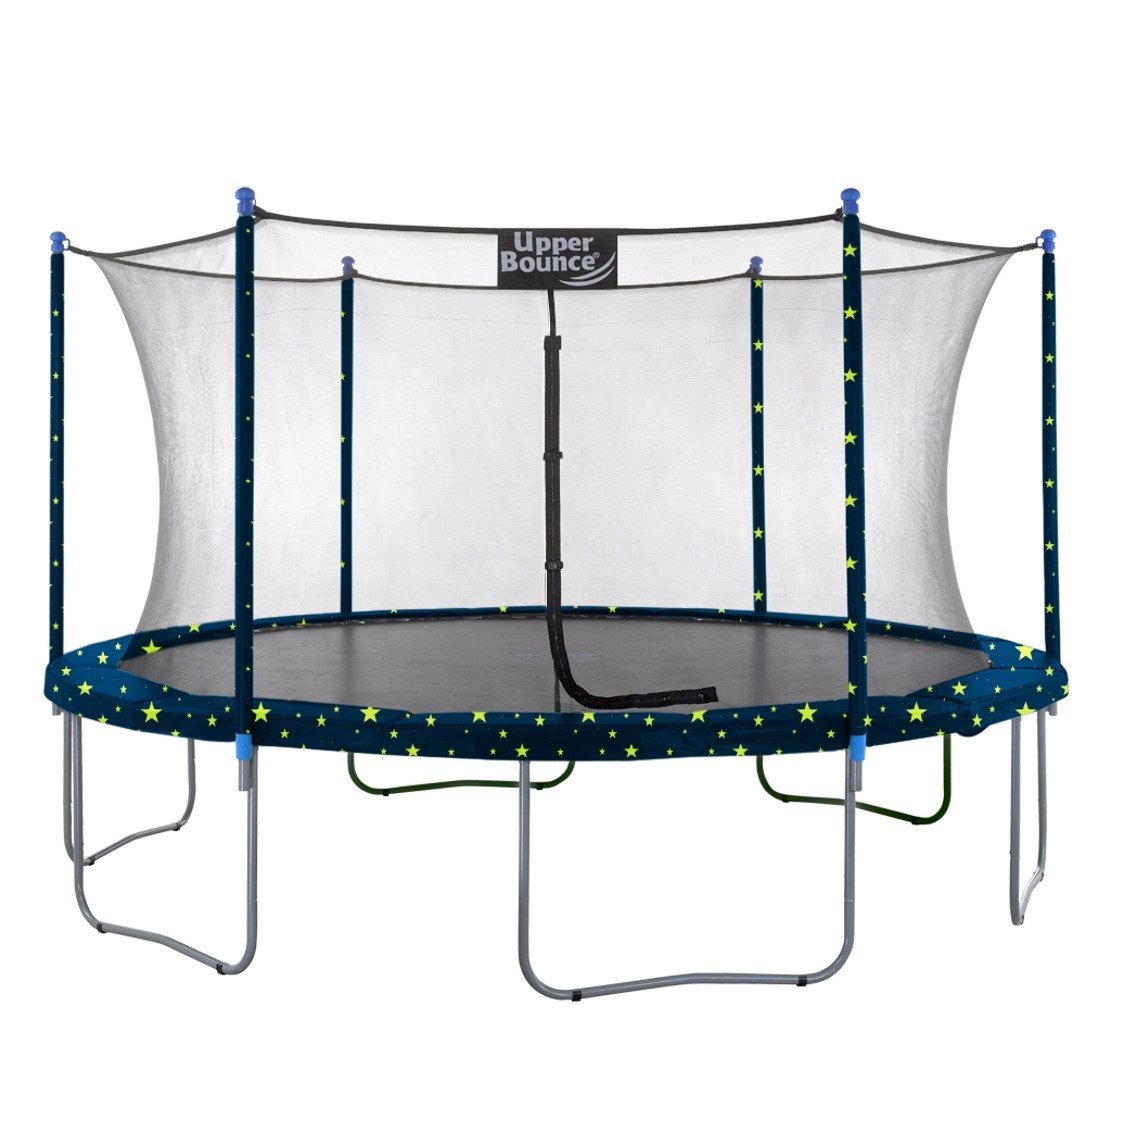 15Ft Large Trampoline and Enclosure Set | Garden & Outdoor Trampoline with Safety Net, Mat, Pad | Starry Night